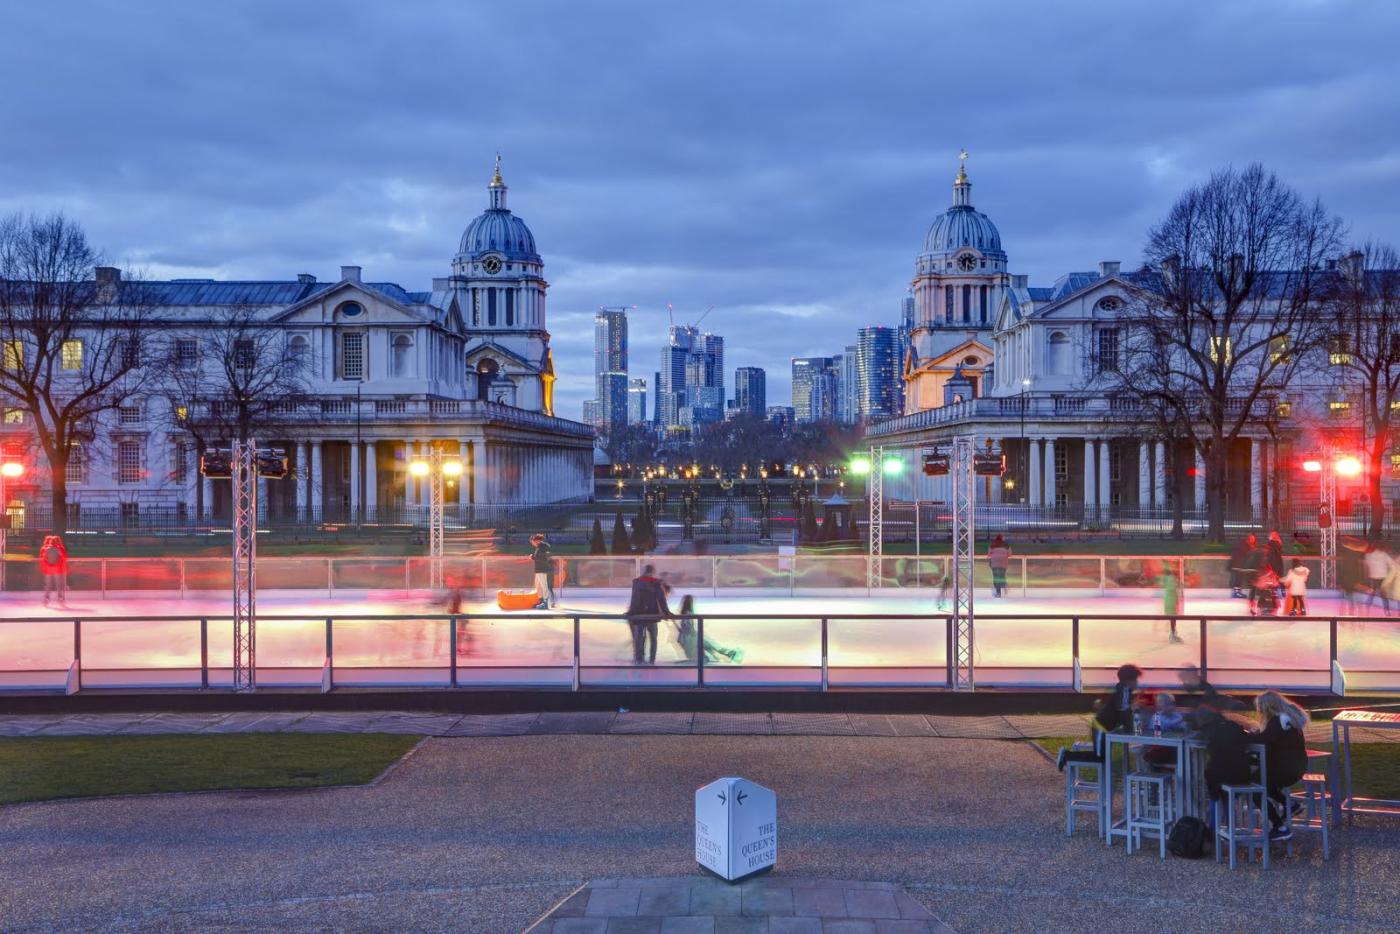 An image showing 'Queen's House Ice Rink'